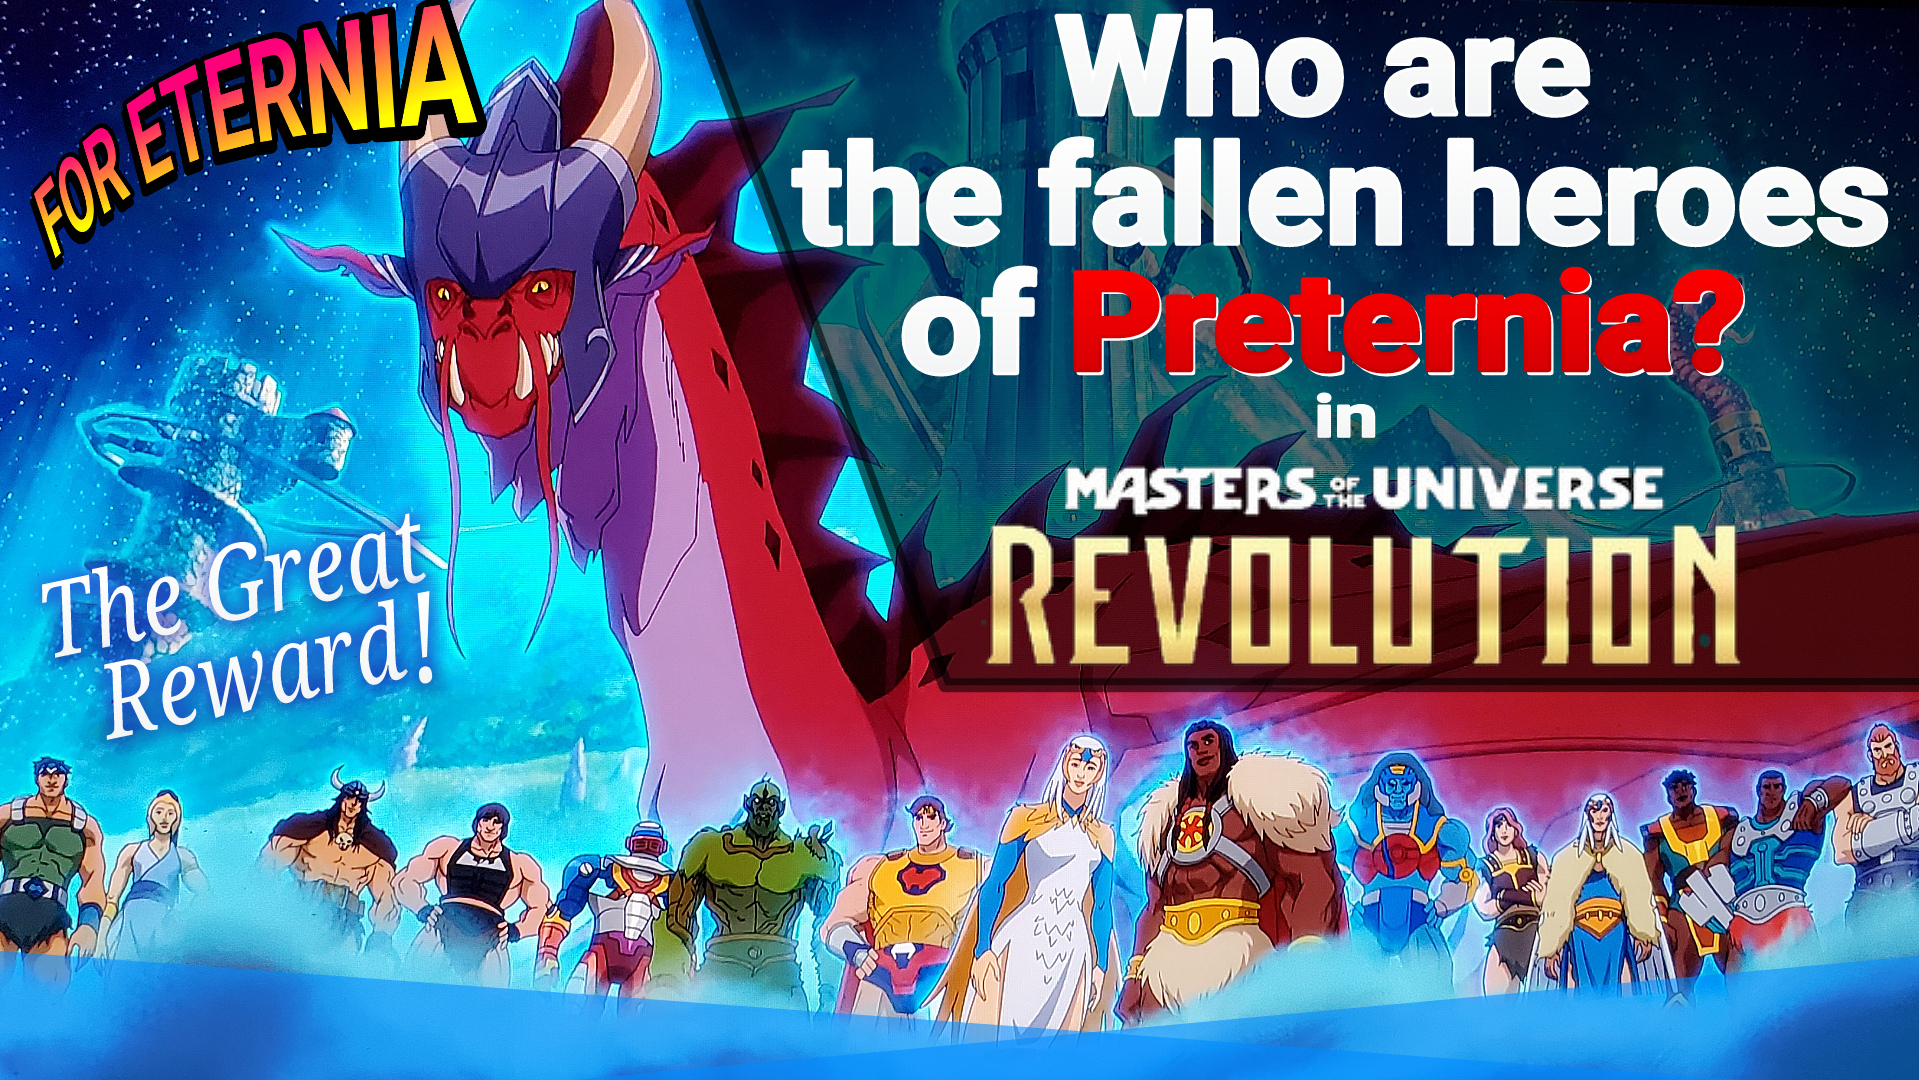 Who are the fallen heroes of Preternia in ”Masters of the Universe: Revolution”?